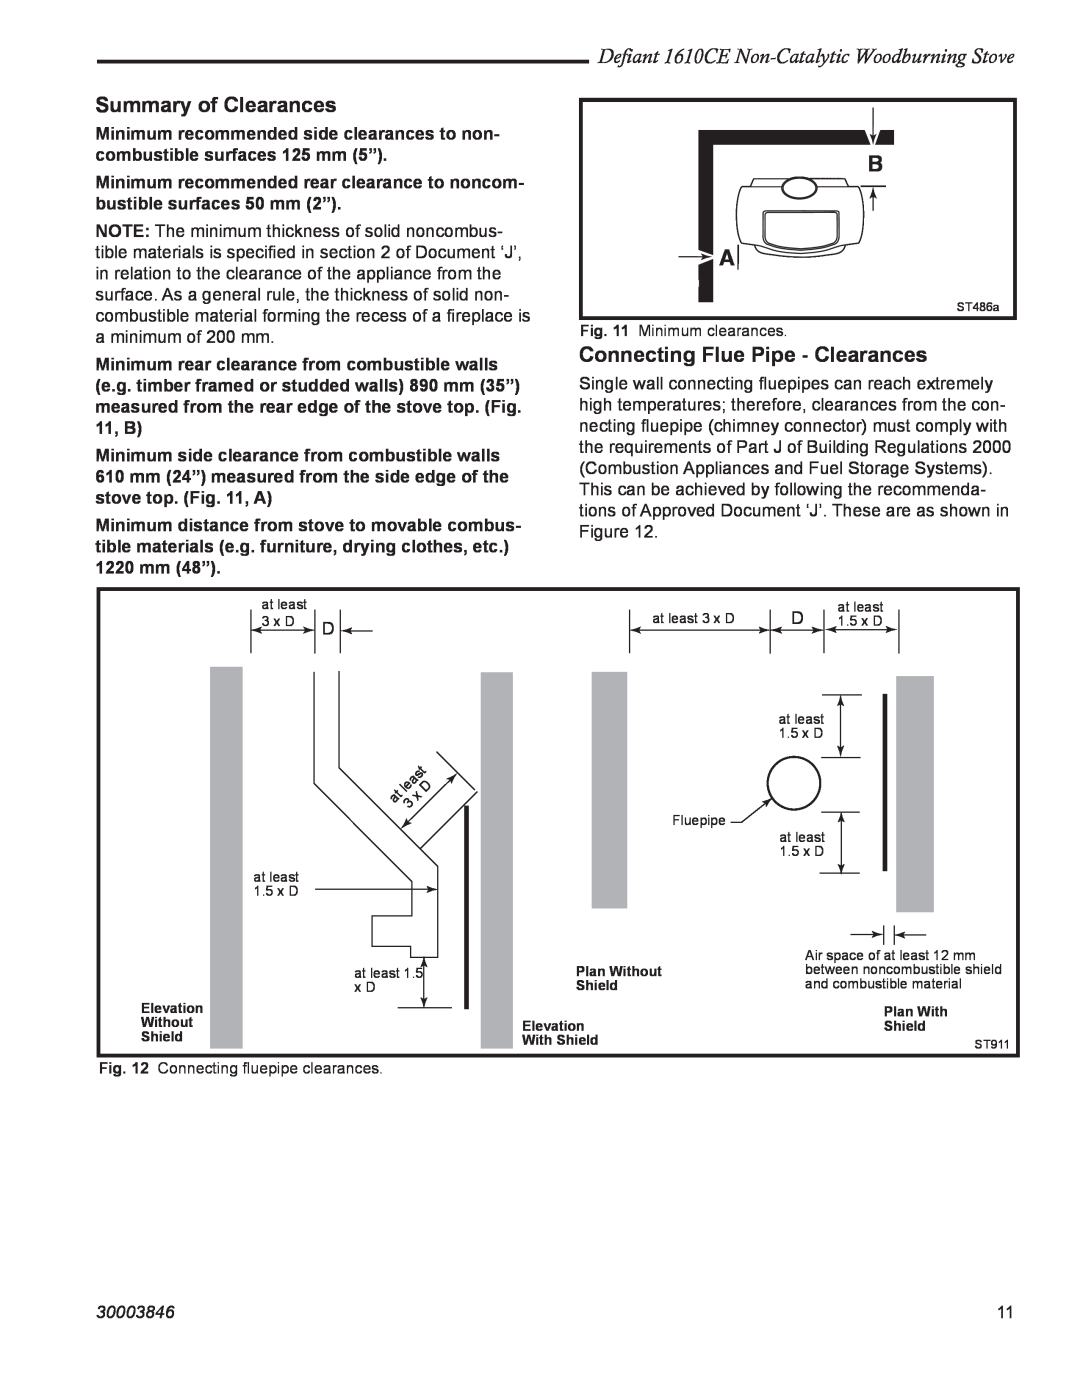 Vermont Casting 1610CE installation instructions Summary of Clearances, Connecting Flue Pipe - Clearances, 30003846 